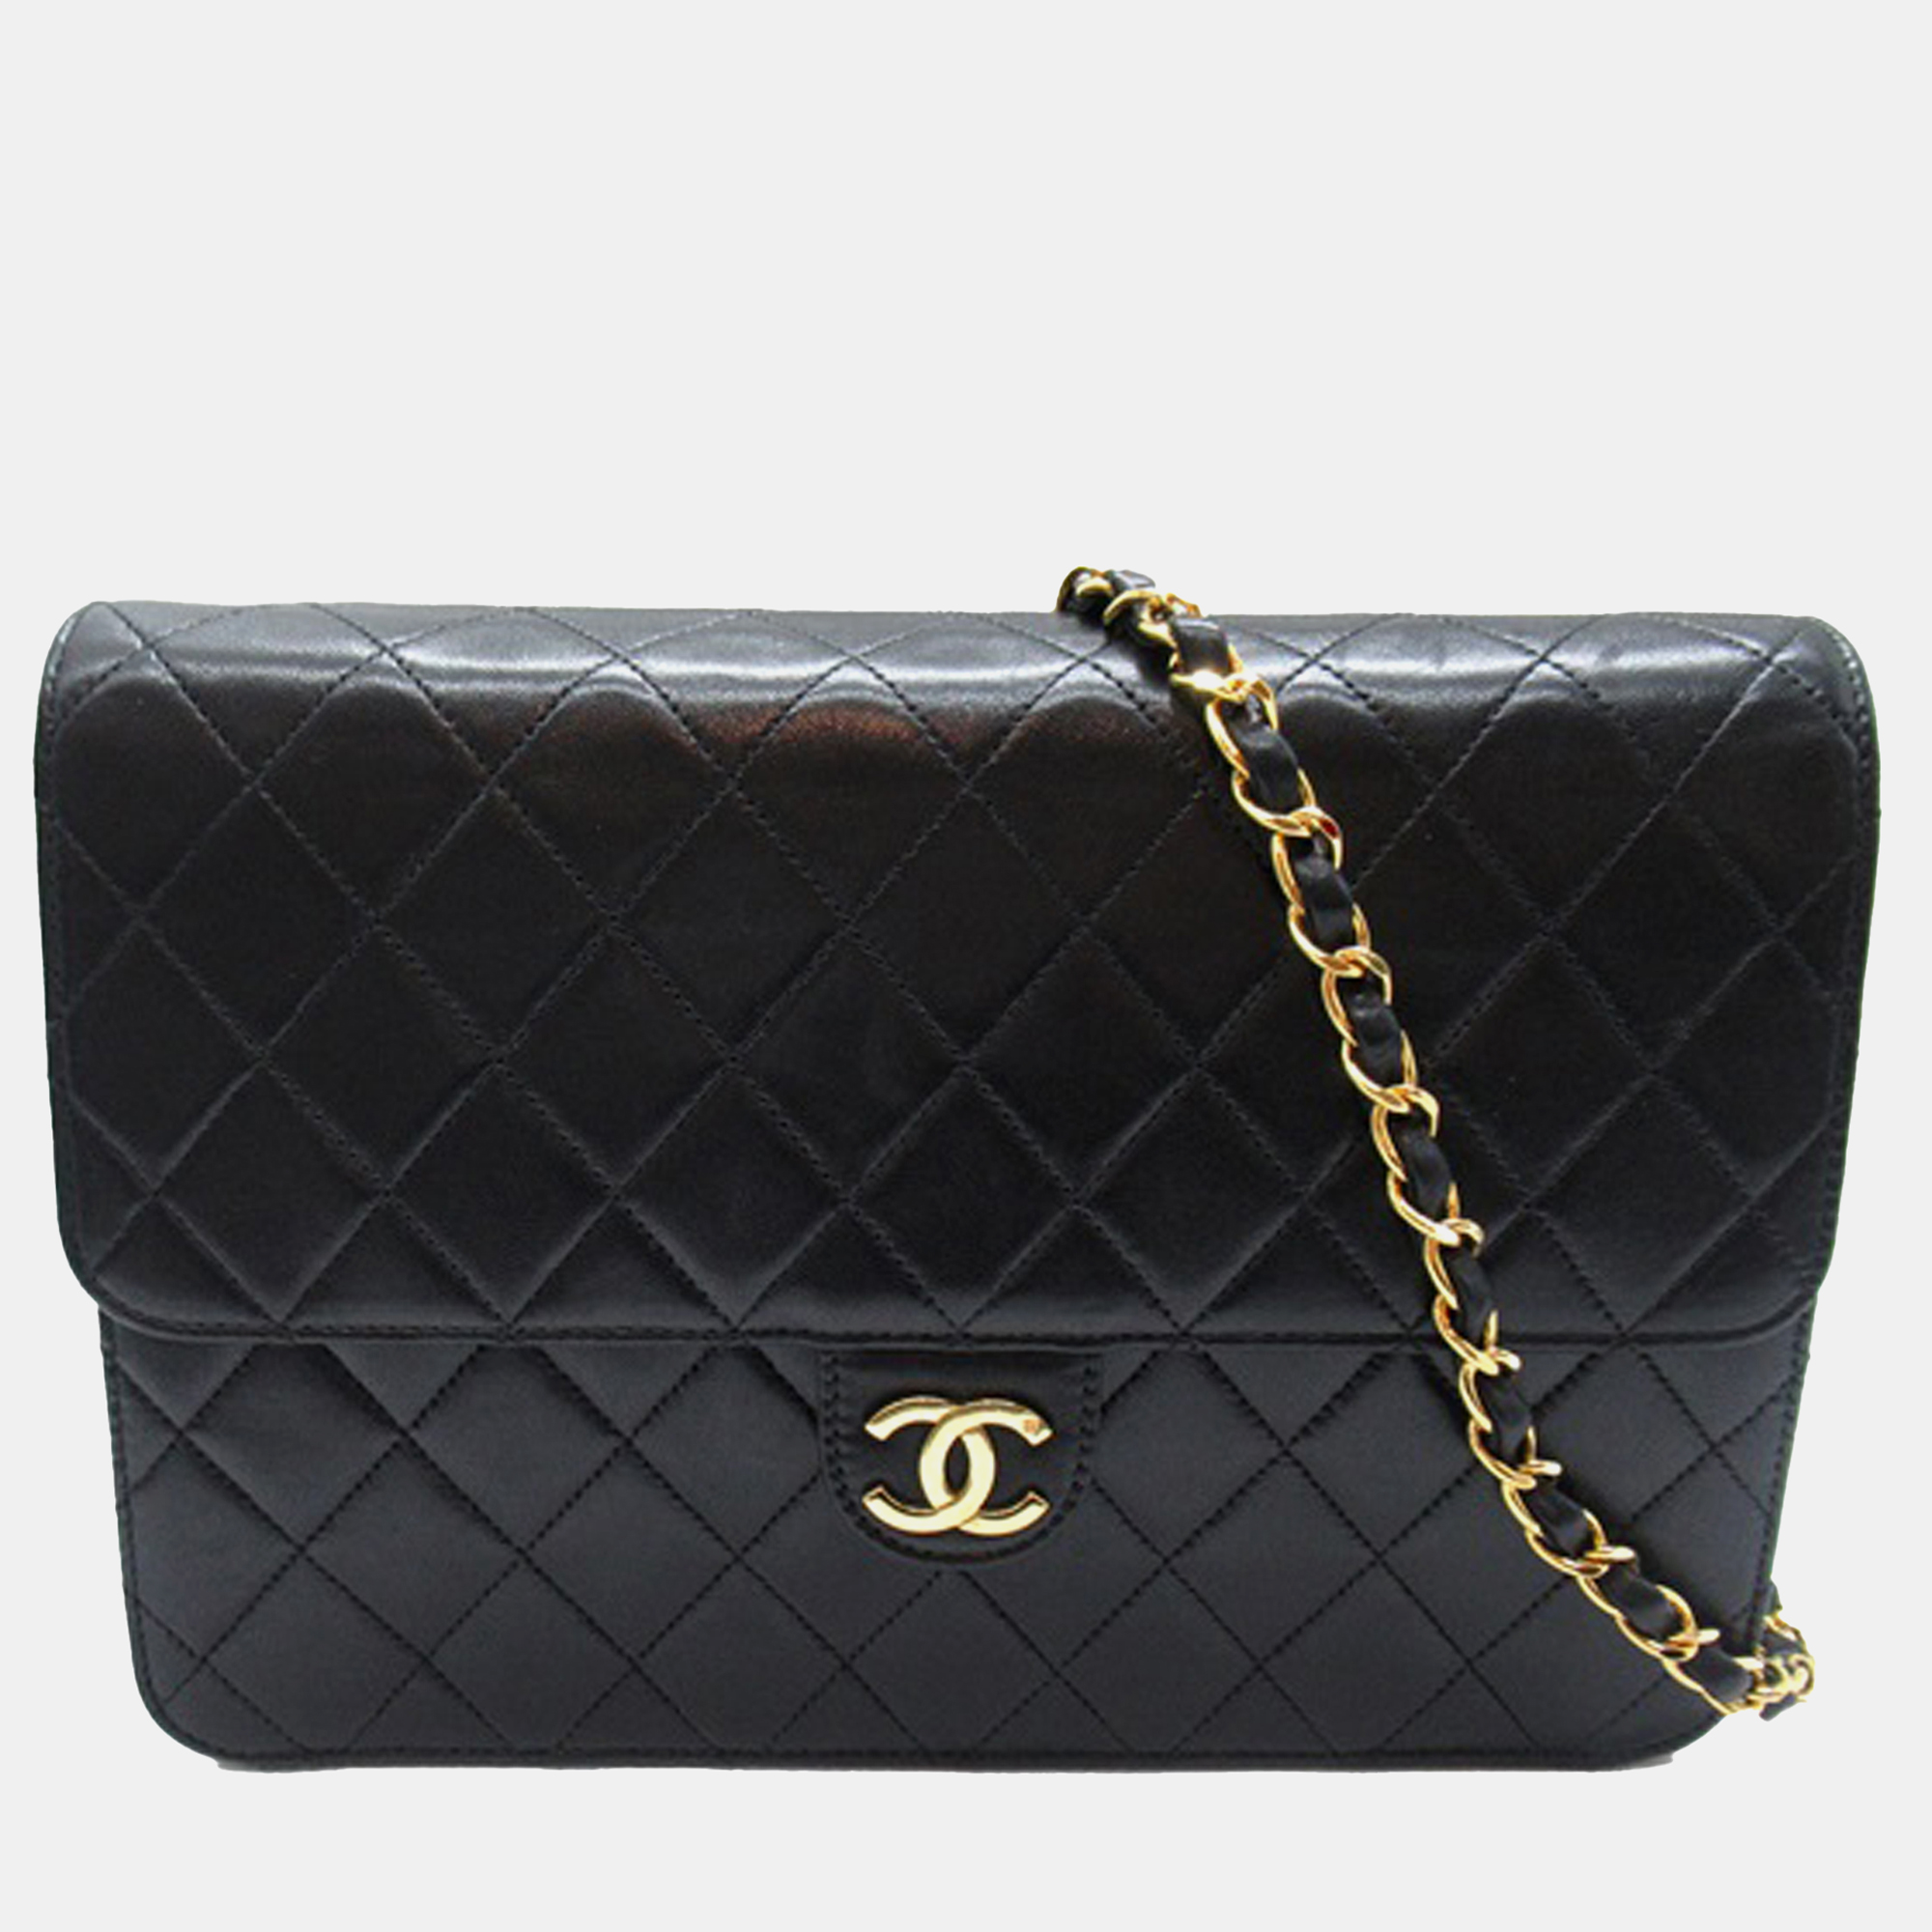 Chanel dior cc quilted lambskin single flap